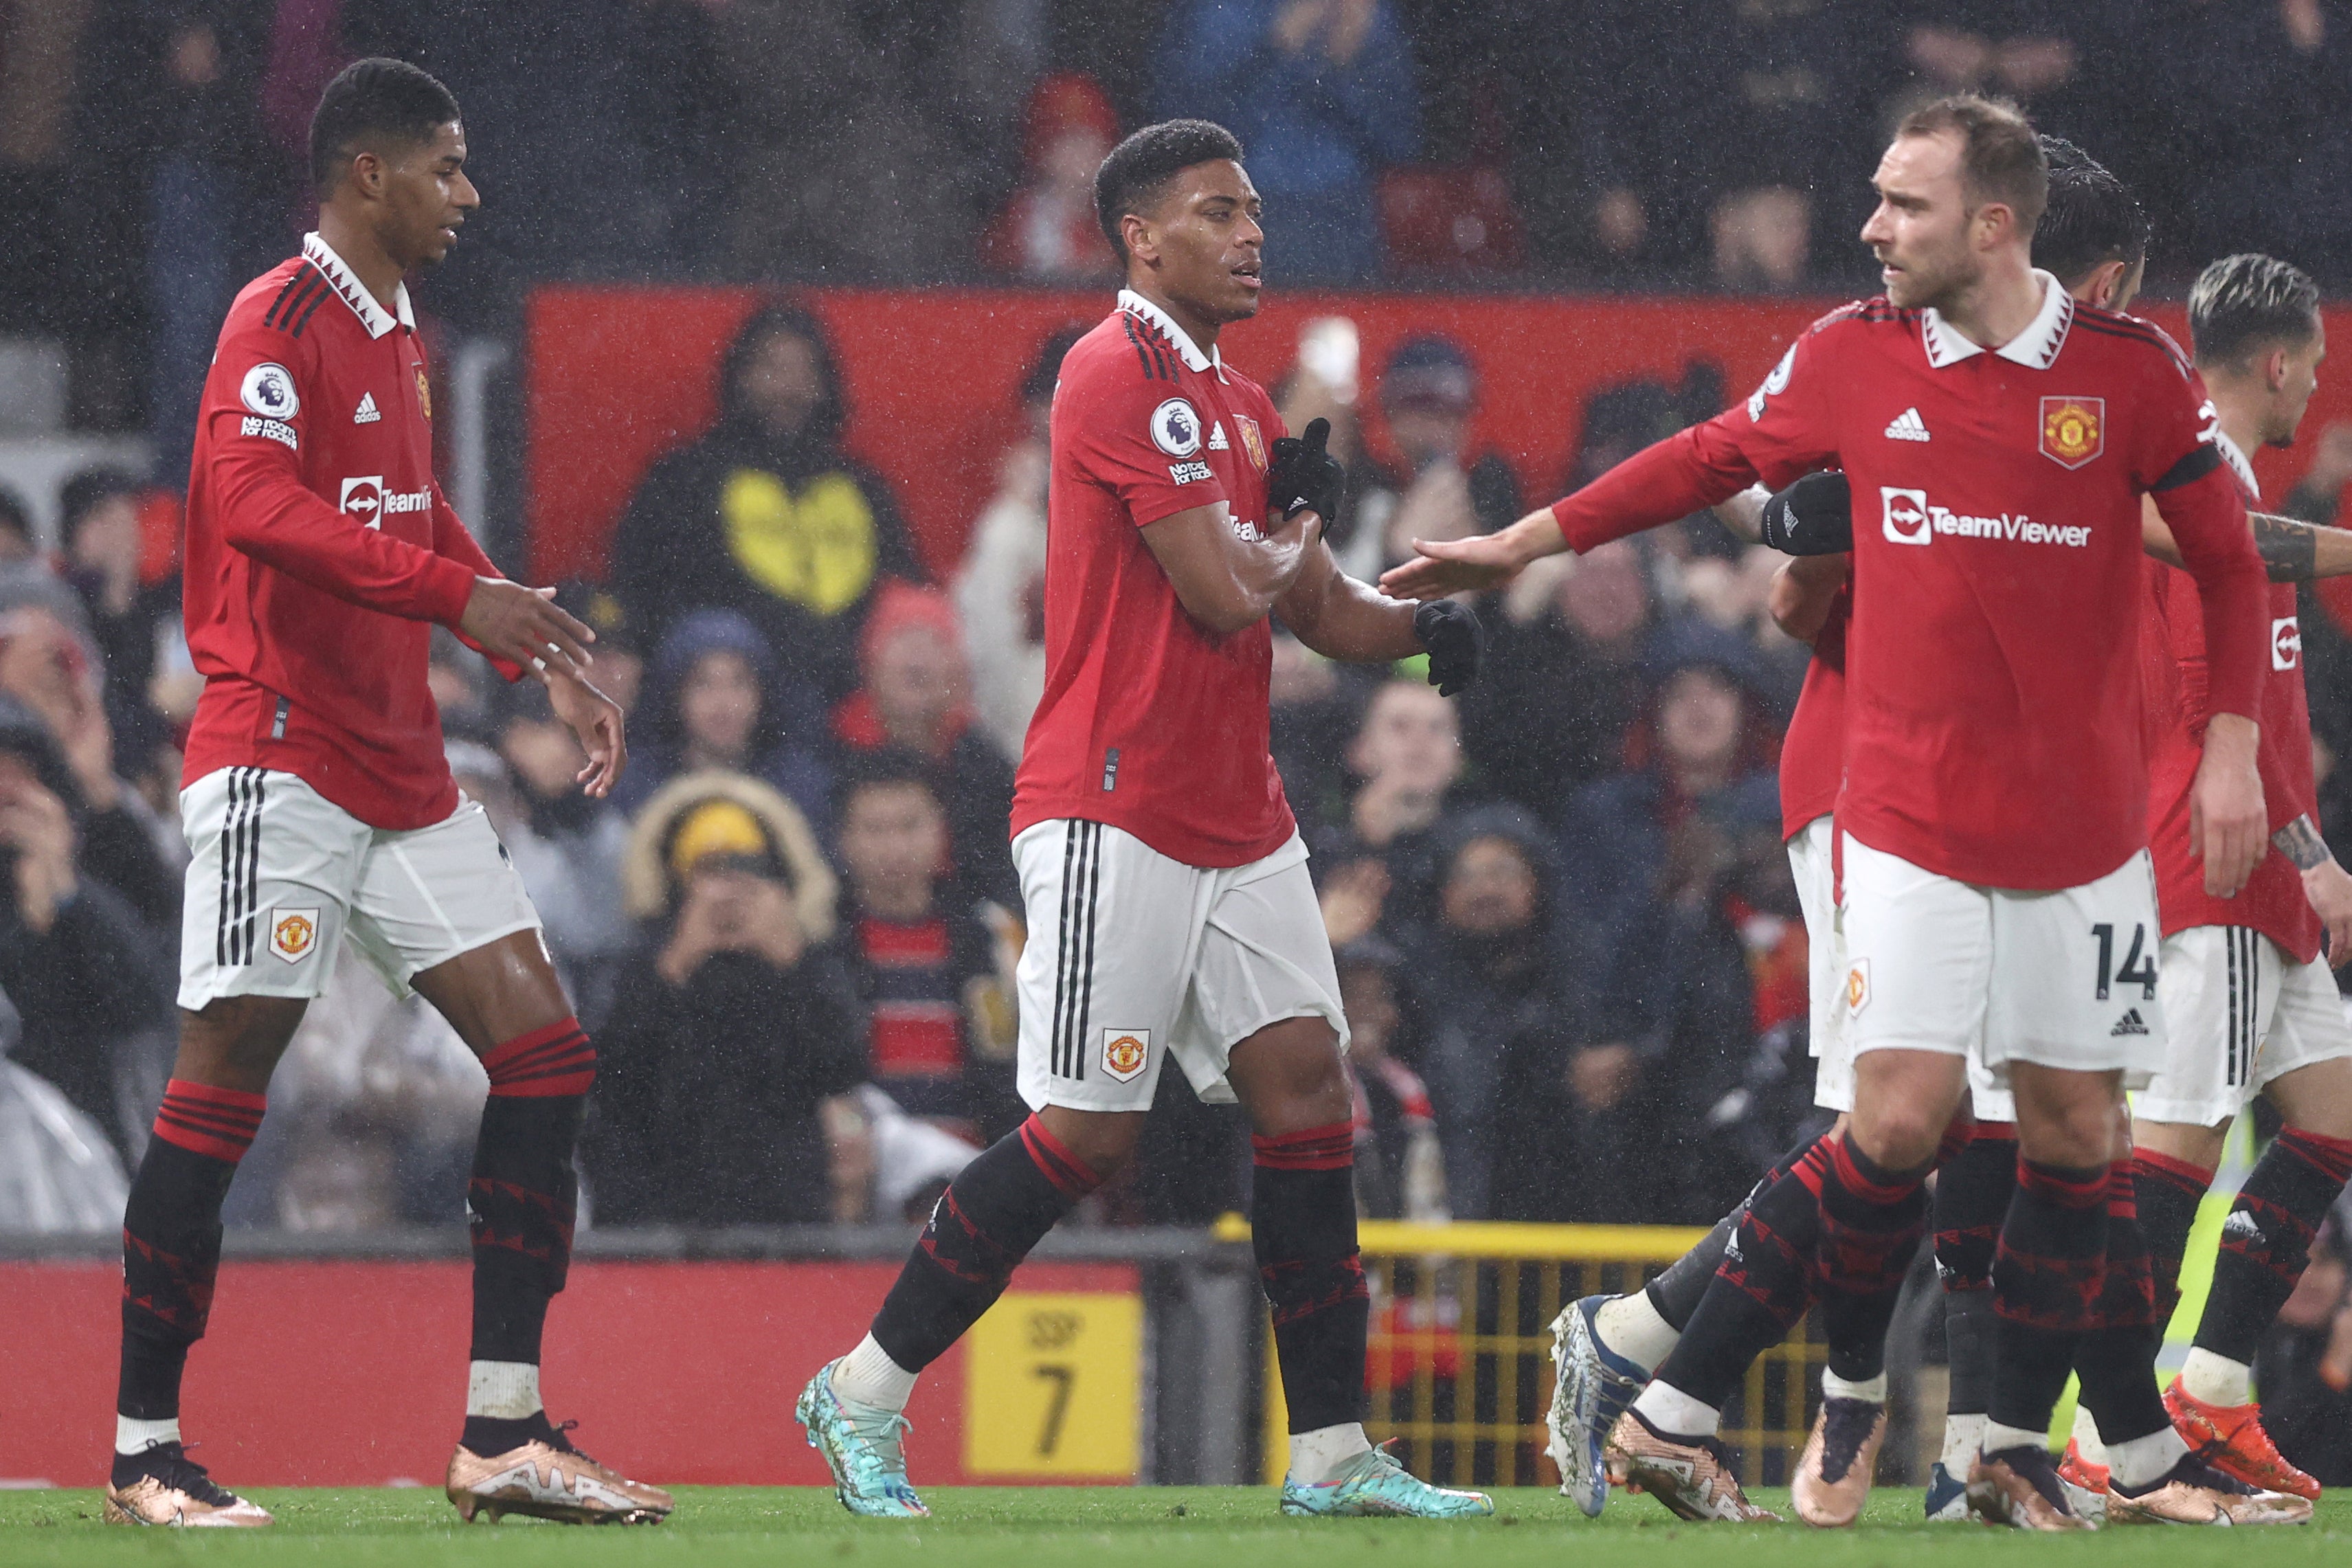 Marcus Rashford, Anthony Martial and Christian Eriksen are all potential stop-gap options to solve the right-wing issue